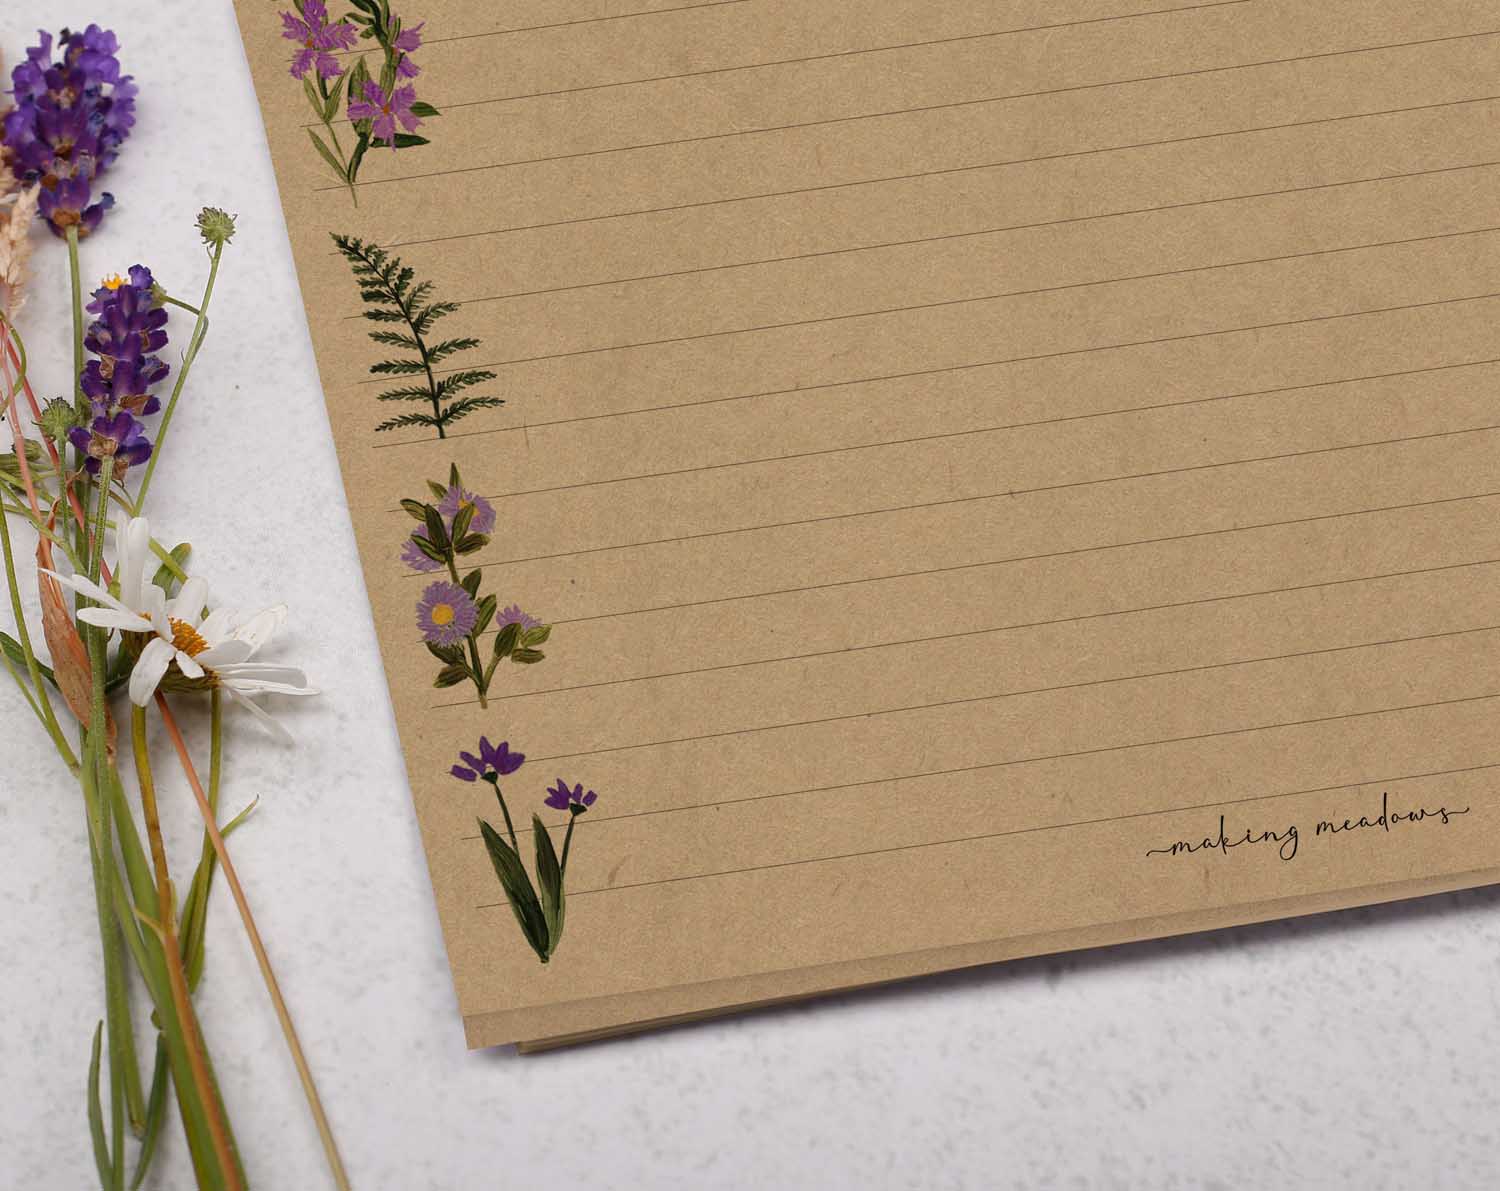 A4 Kraft Letter Writing Paper Sheets with a Purple Wild Flower & Fern Border design. 